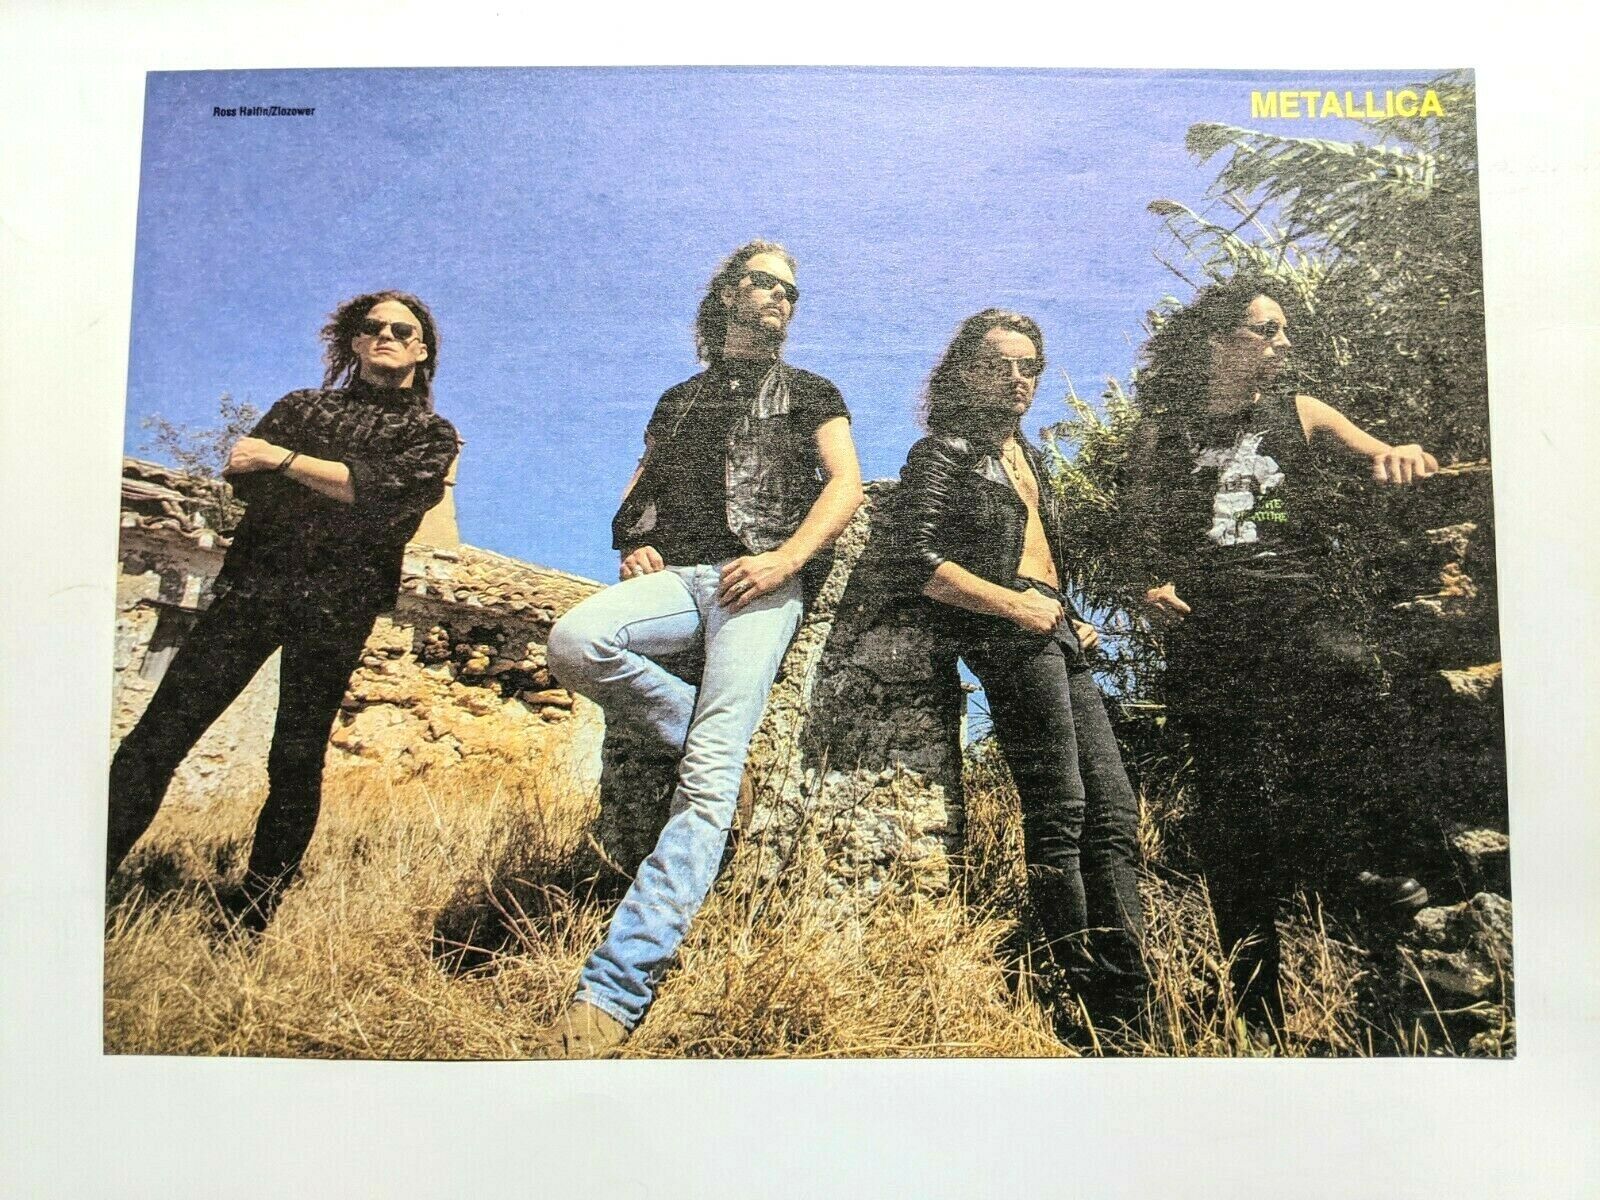 Metallica / Entire Band Magazine Full Page Pinup Poster Clipping (1)